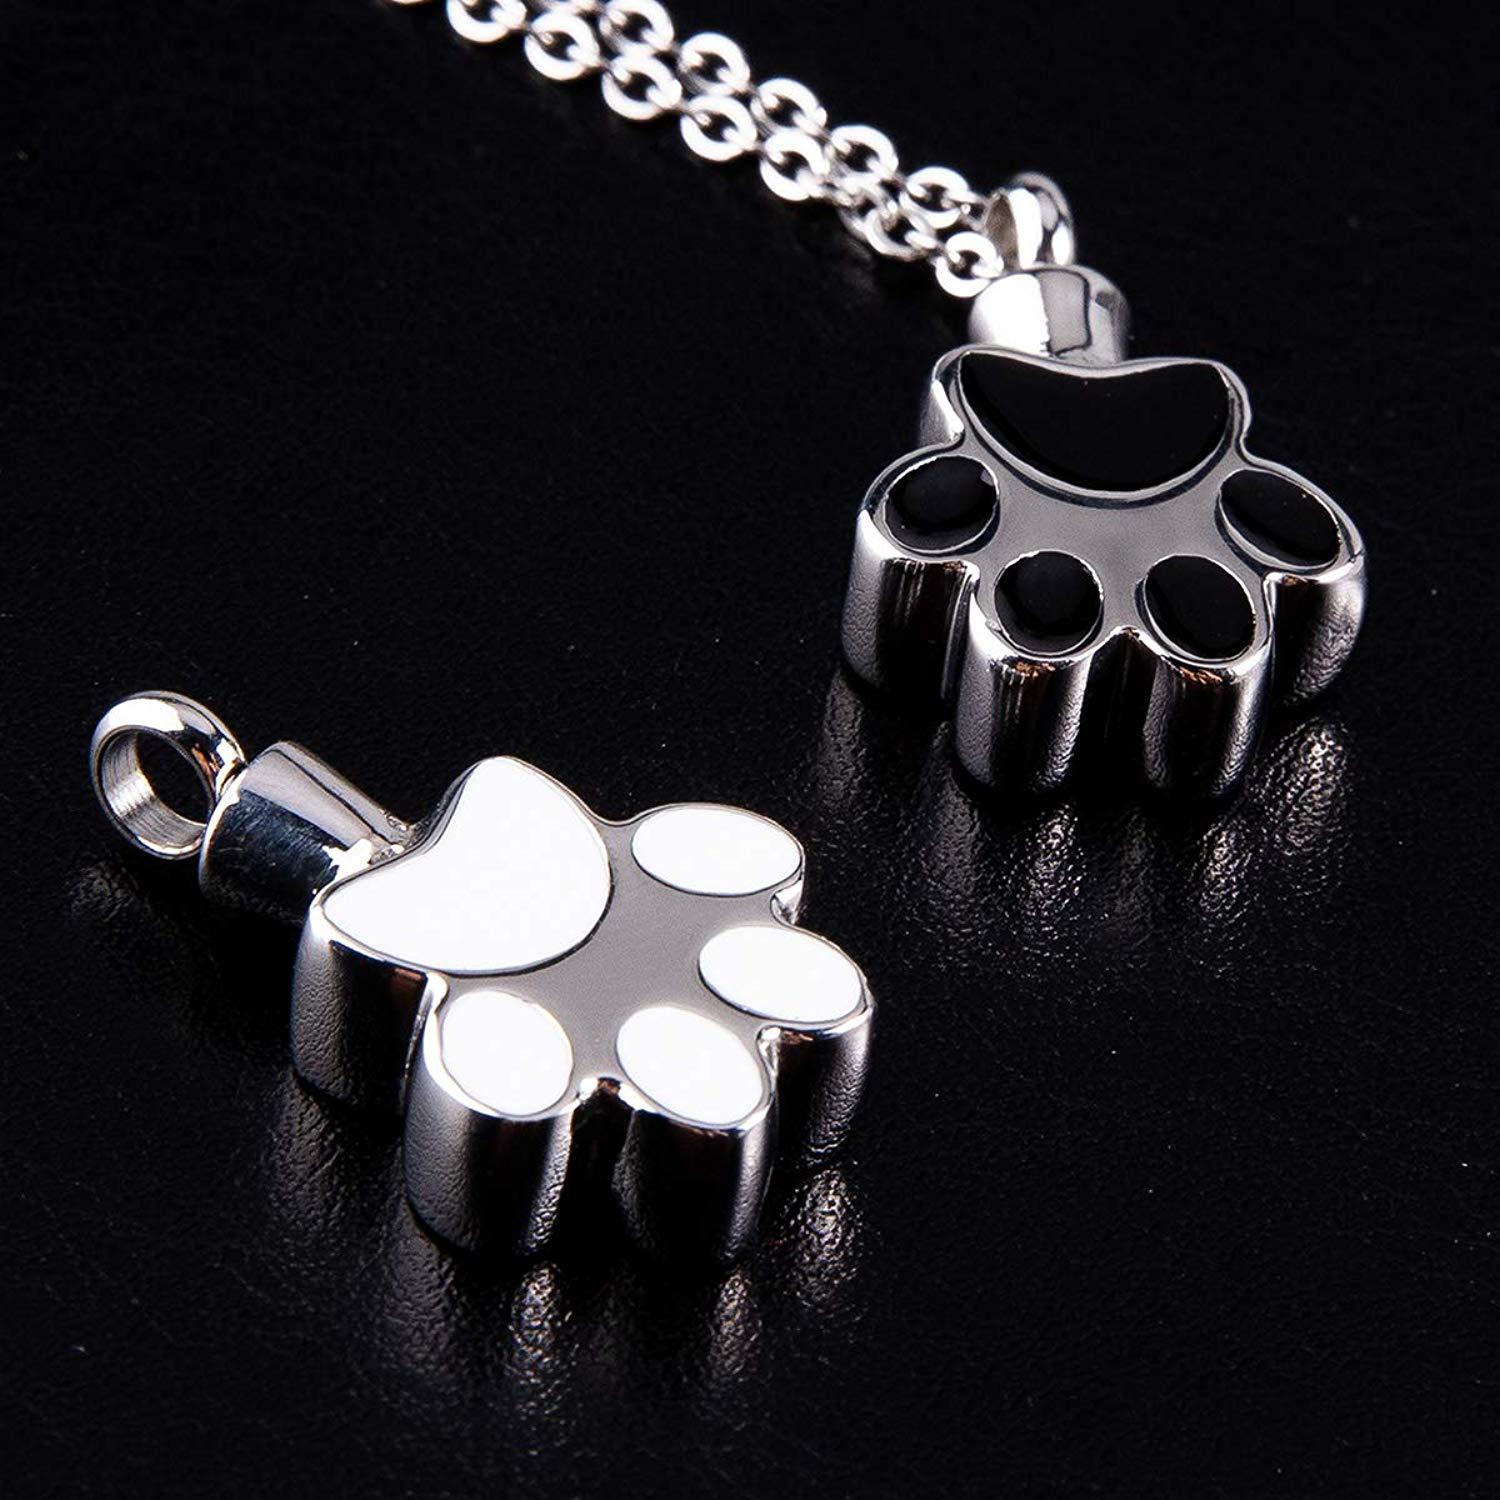 Black and white individual pendant without chain